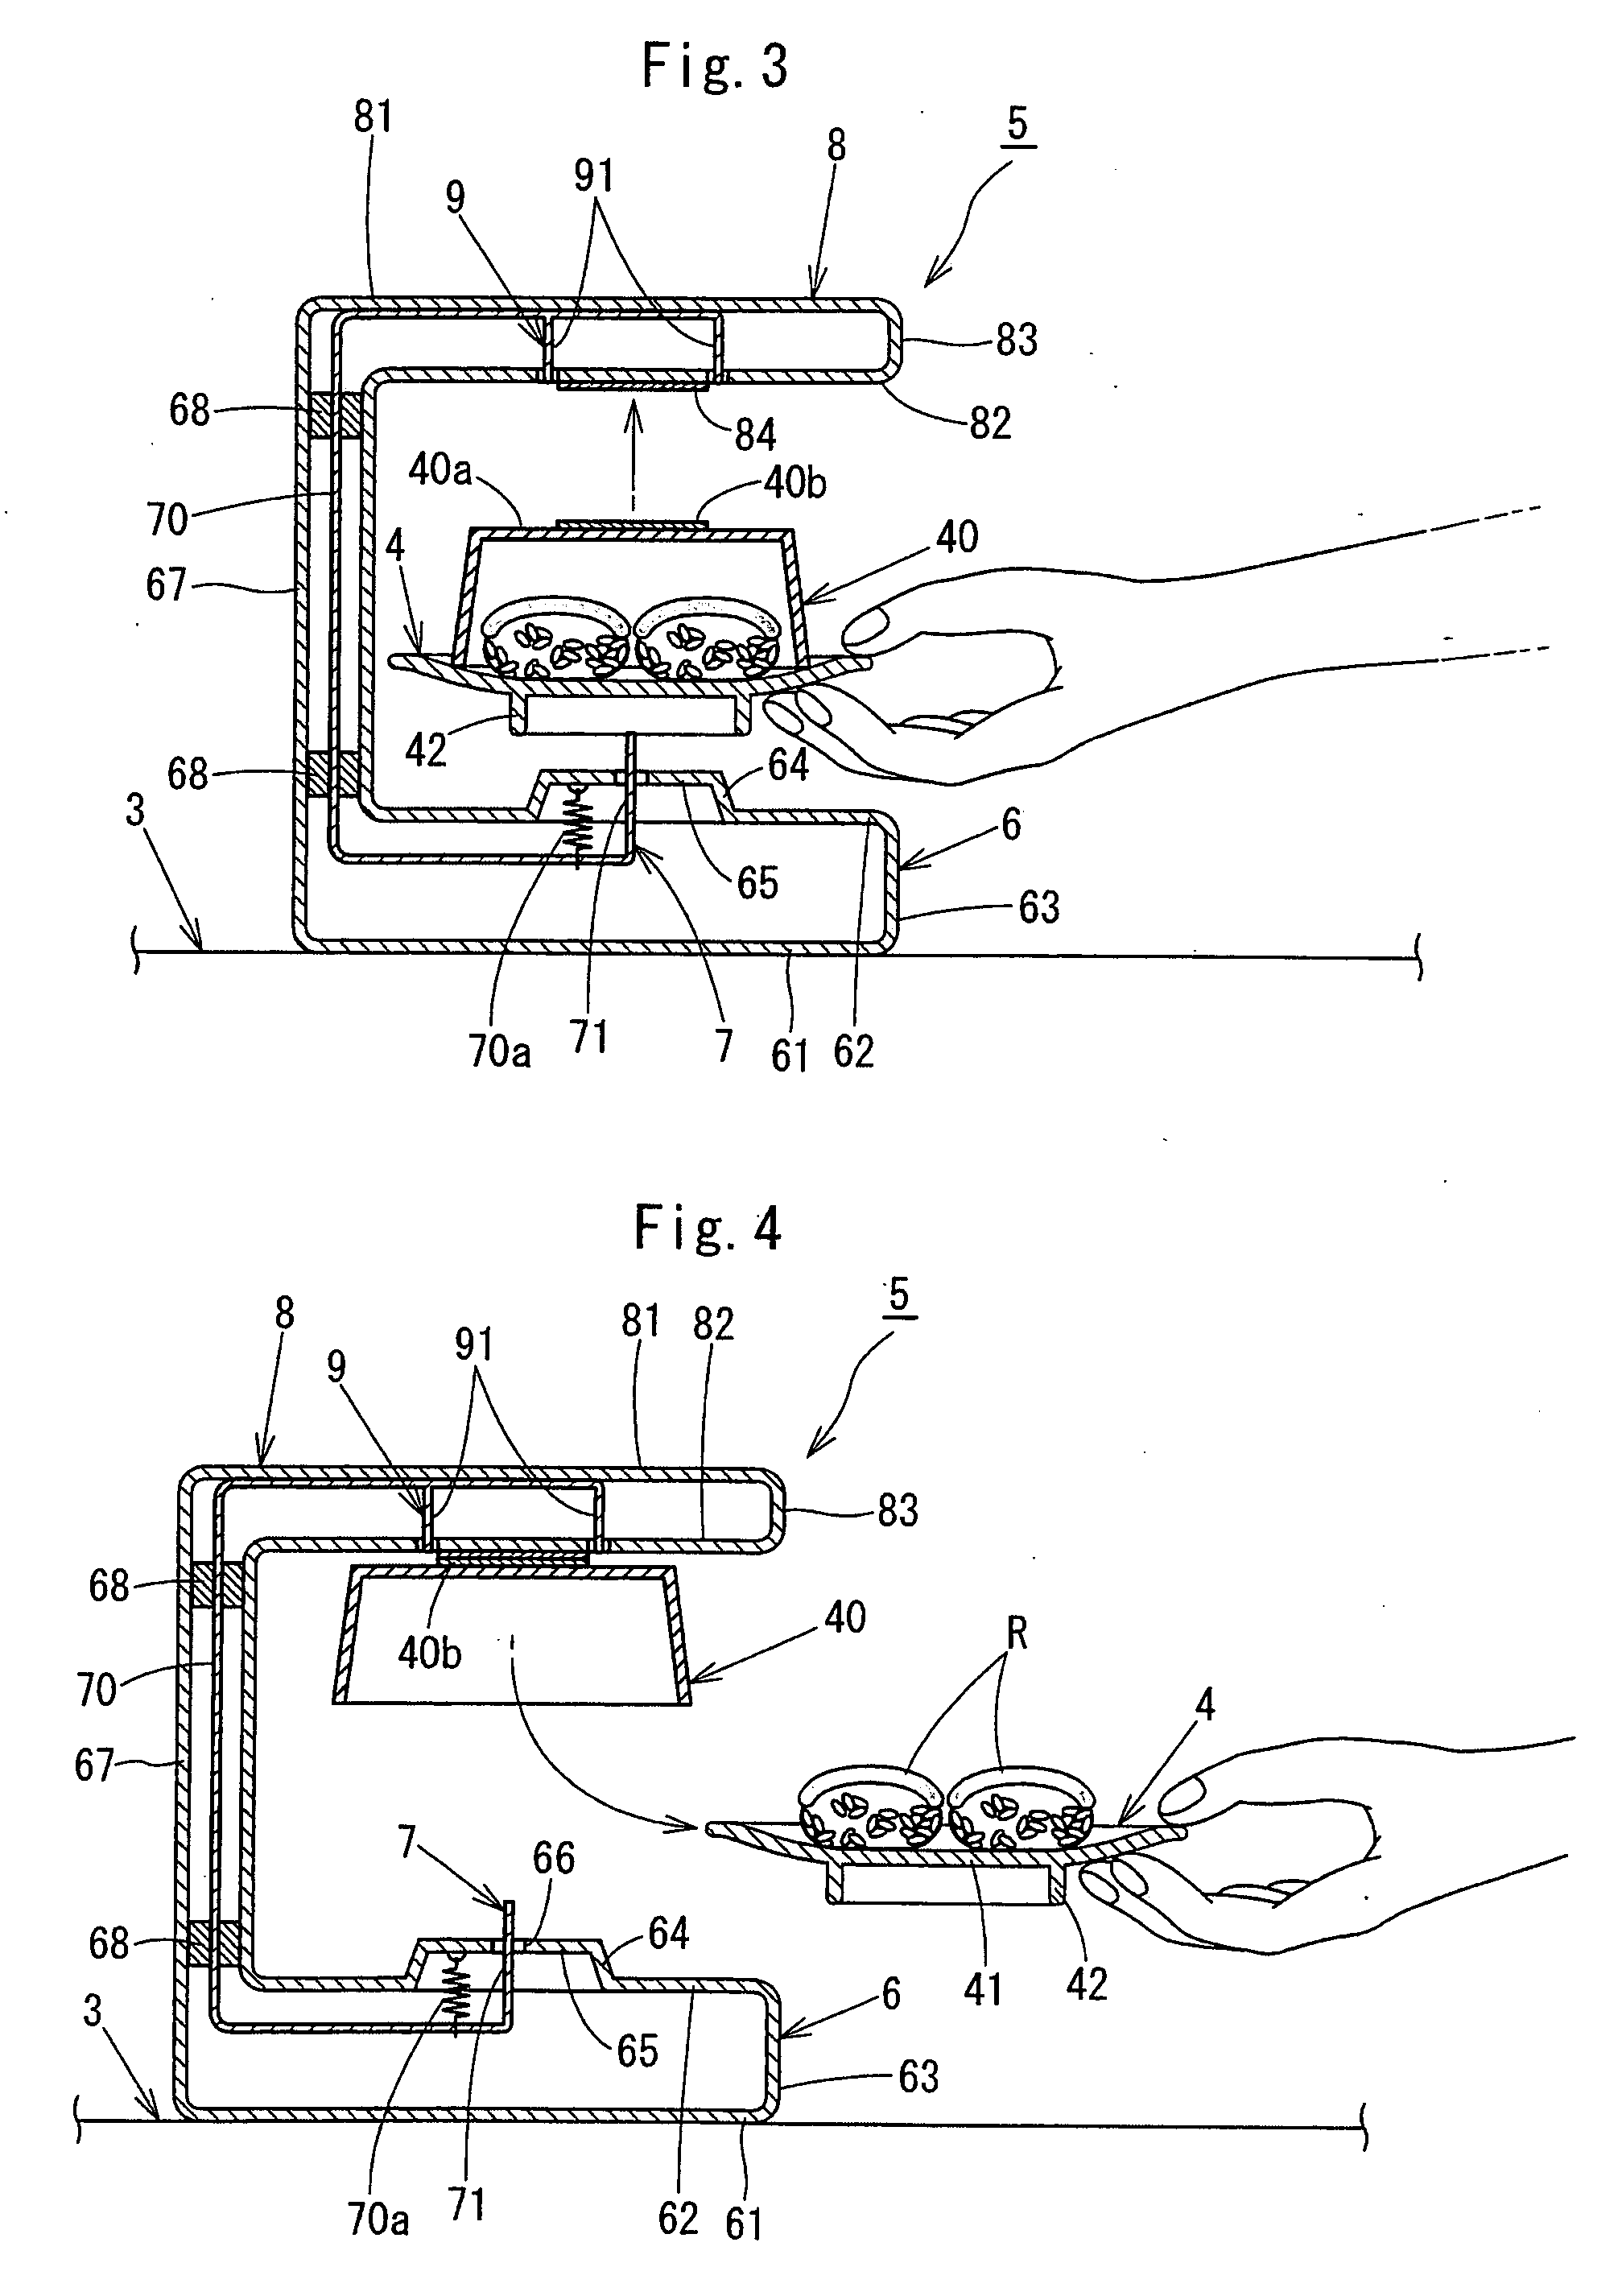 Food and drink conveyance device